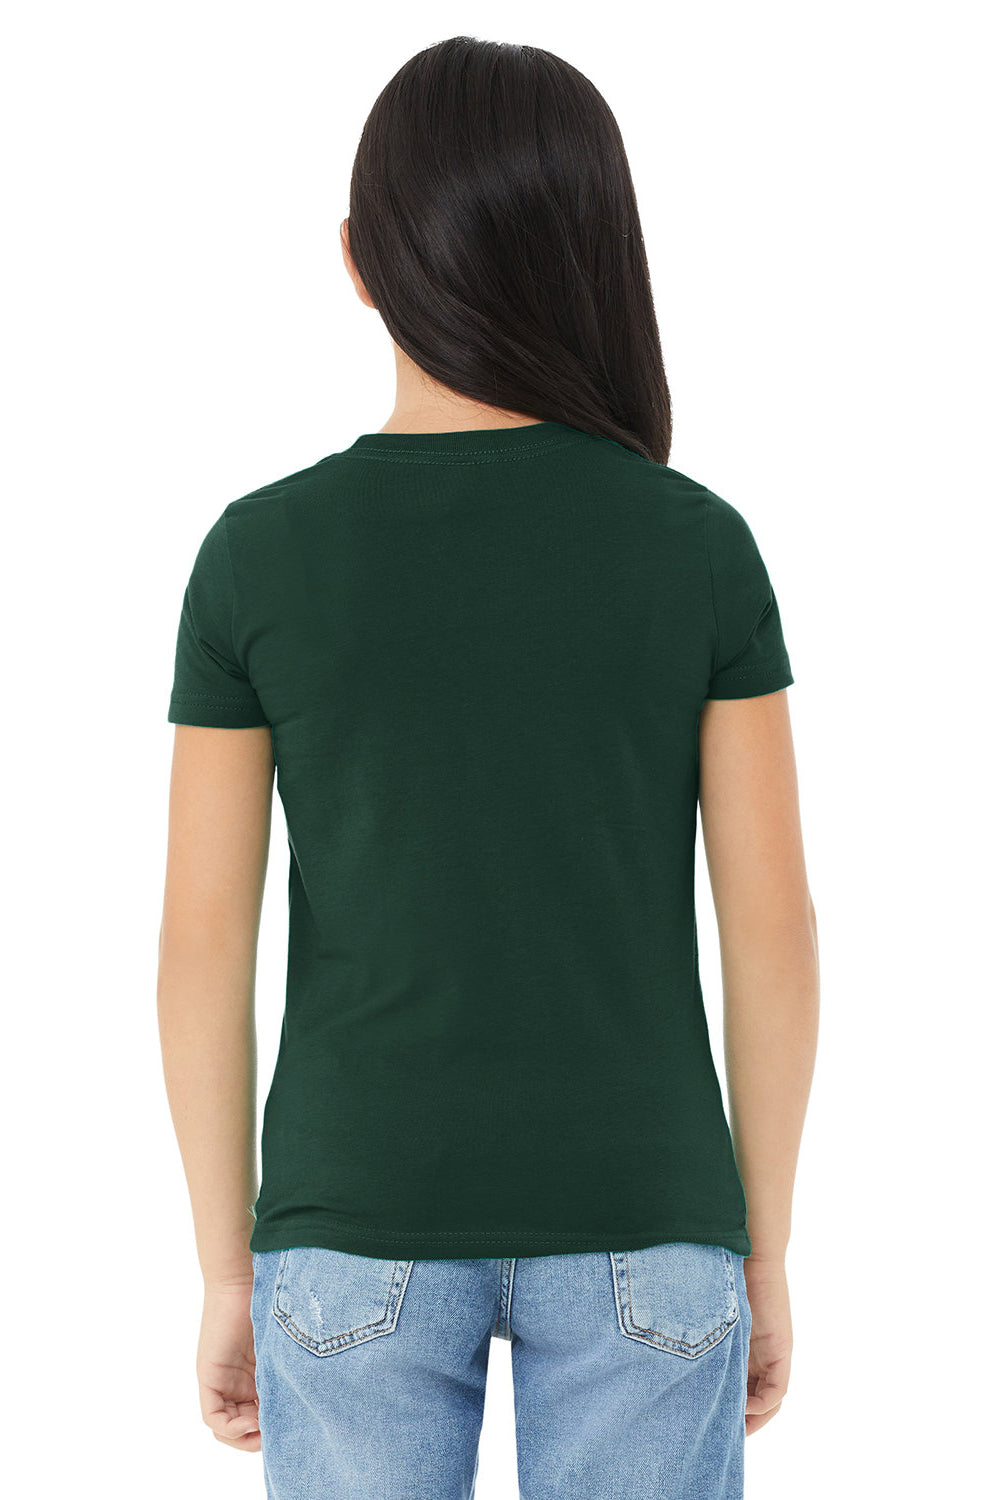 Bella + Canvas 3001Y Youth Jersey Short Sleeve Crewneck T-Shirt Forest Green Model Back